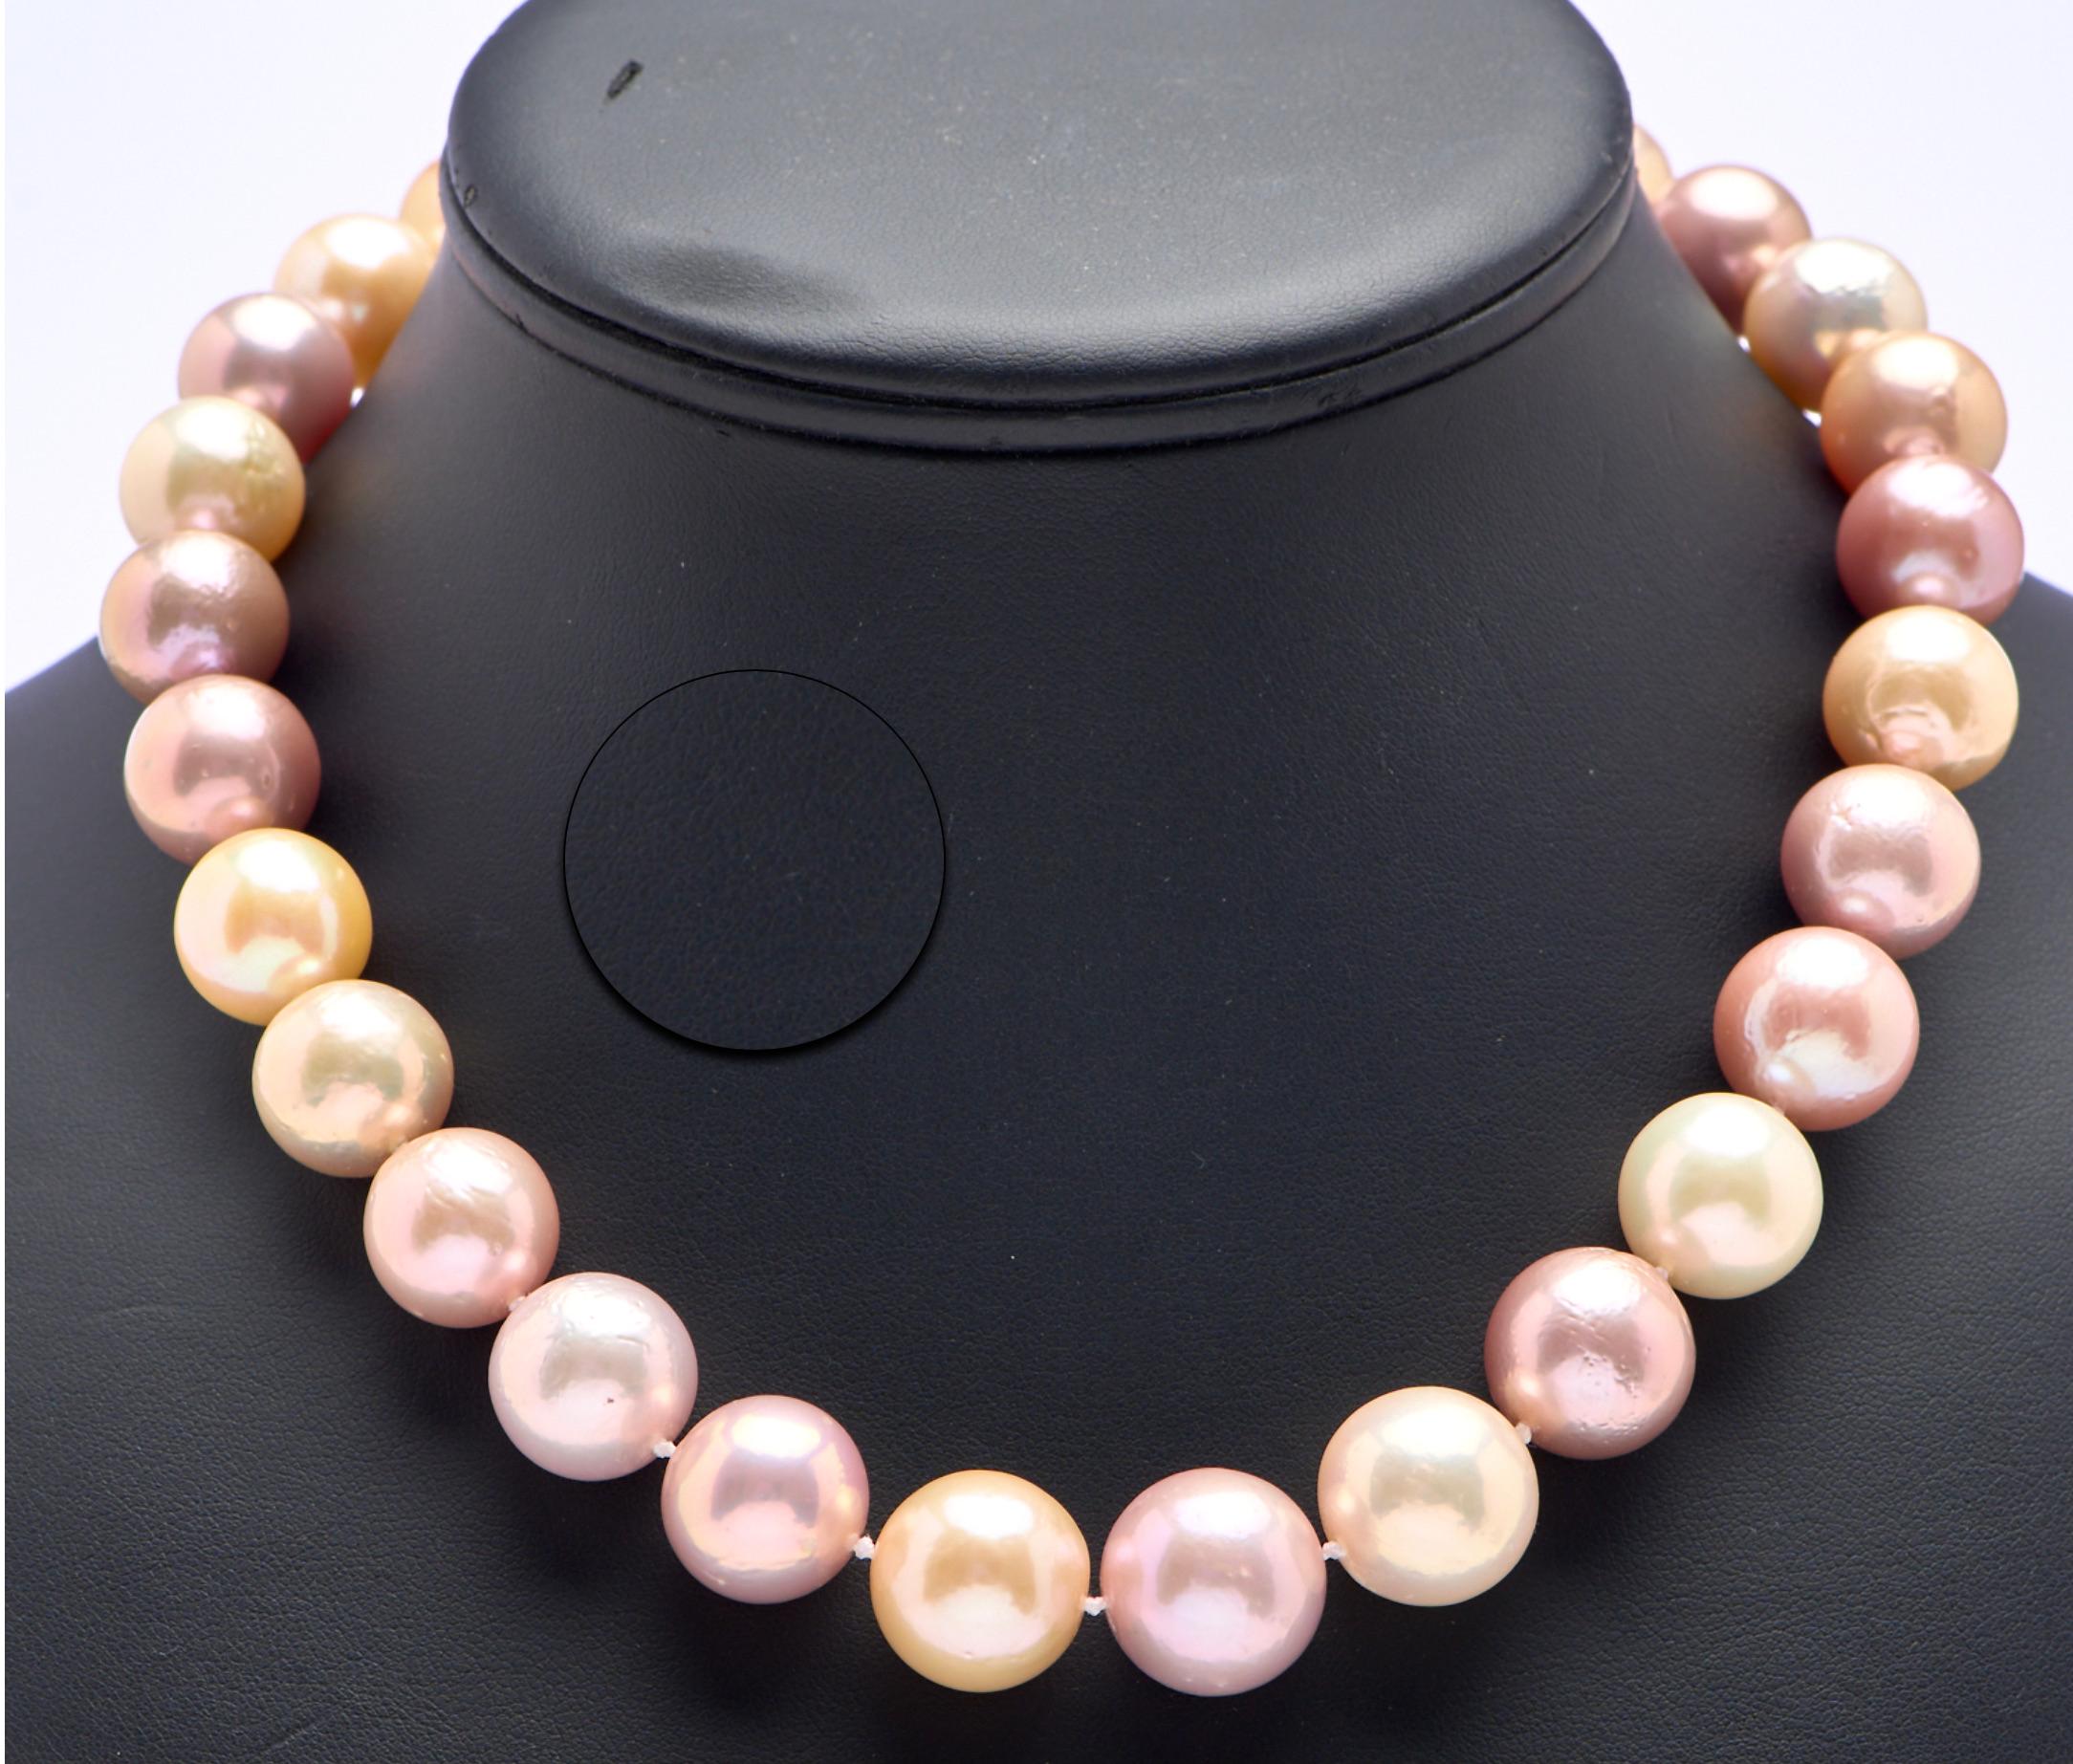 A 14mm to 16.5 mm Lavender Peach Colour Freshwater Pearl Necklace with 14k Gold Clasp

The colour is 100% natural without any treatment.  It shows deep lavender colour and Multicolour overtone. The colour is only exist in special kind of freshwater